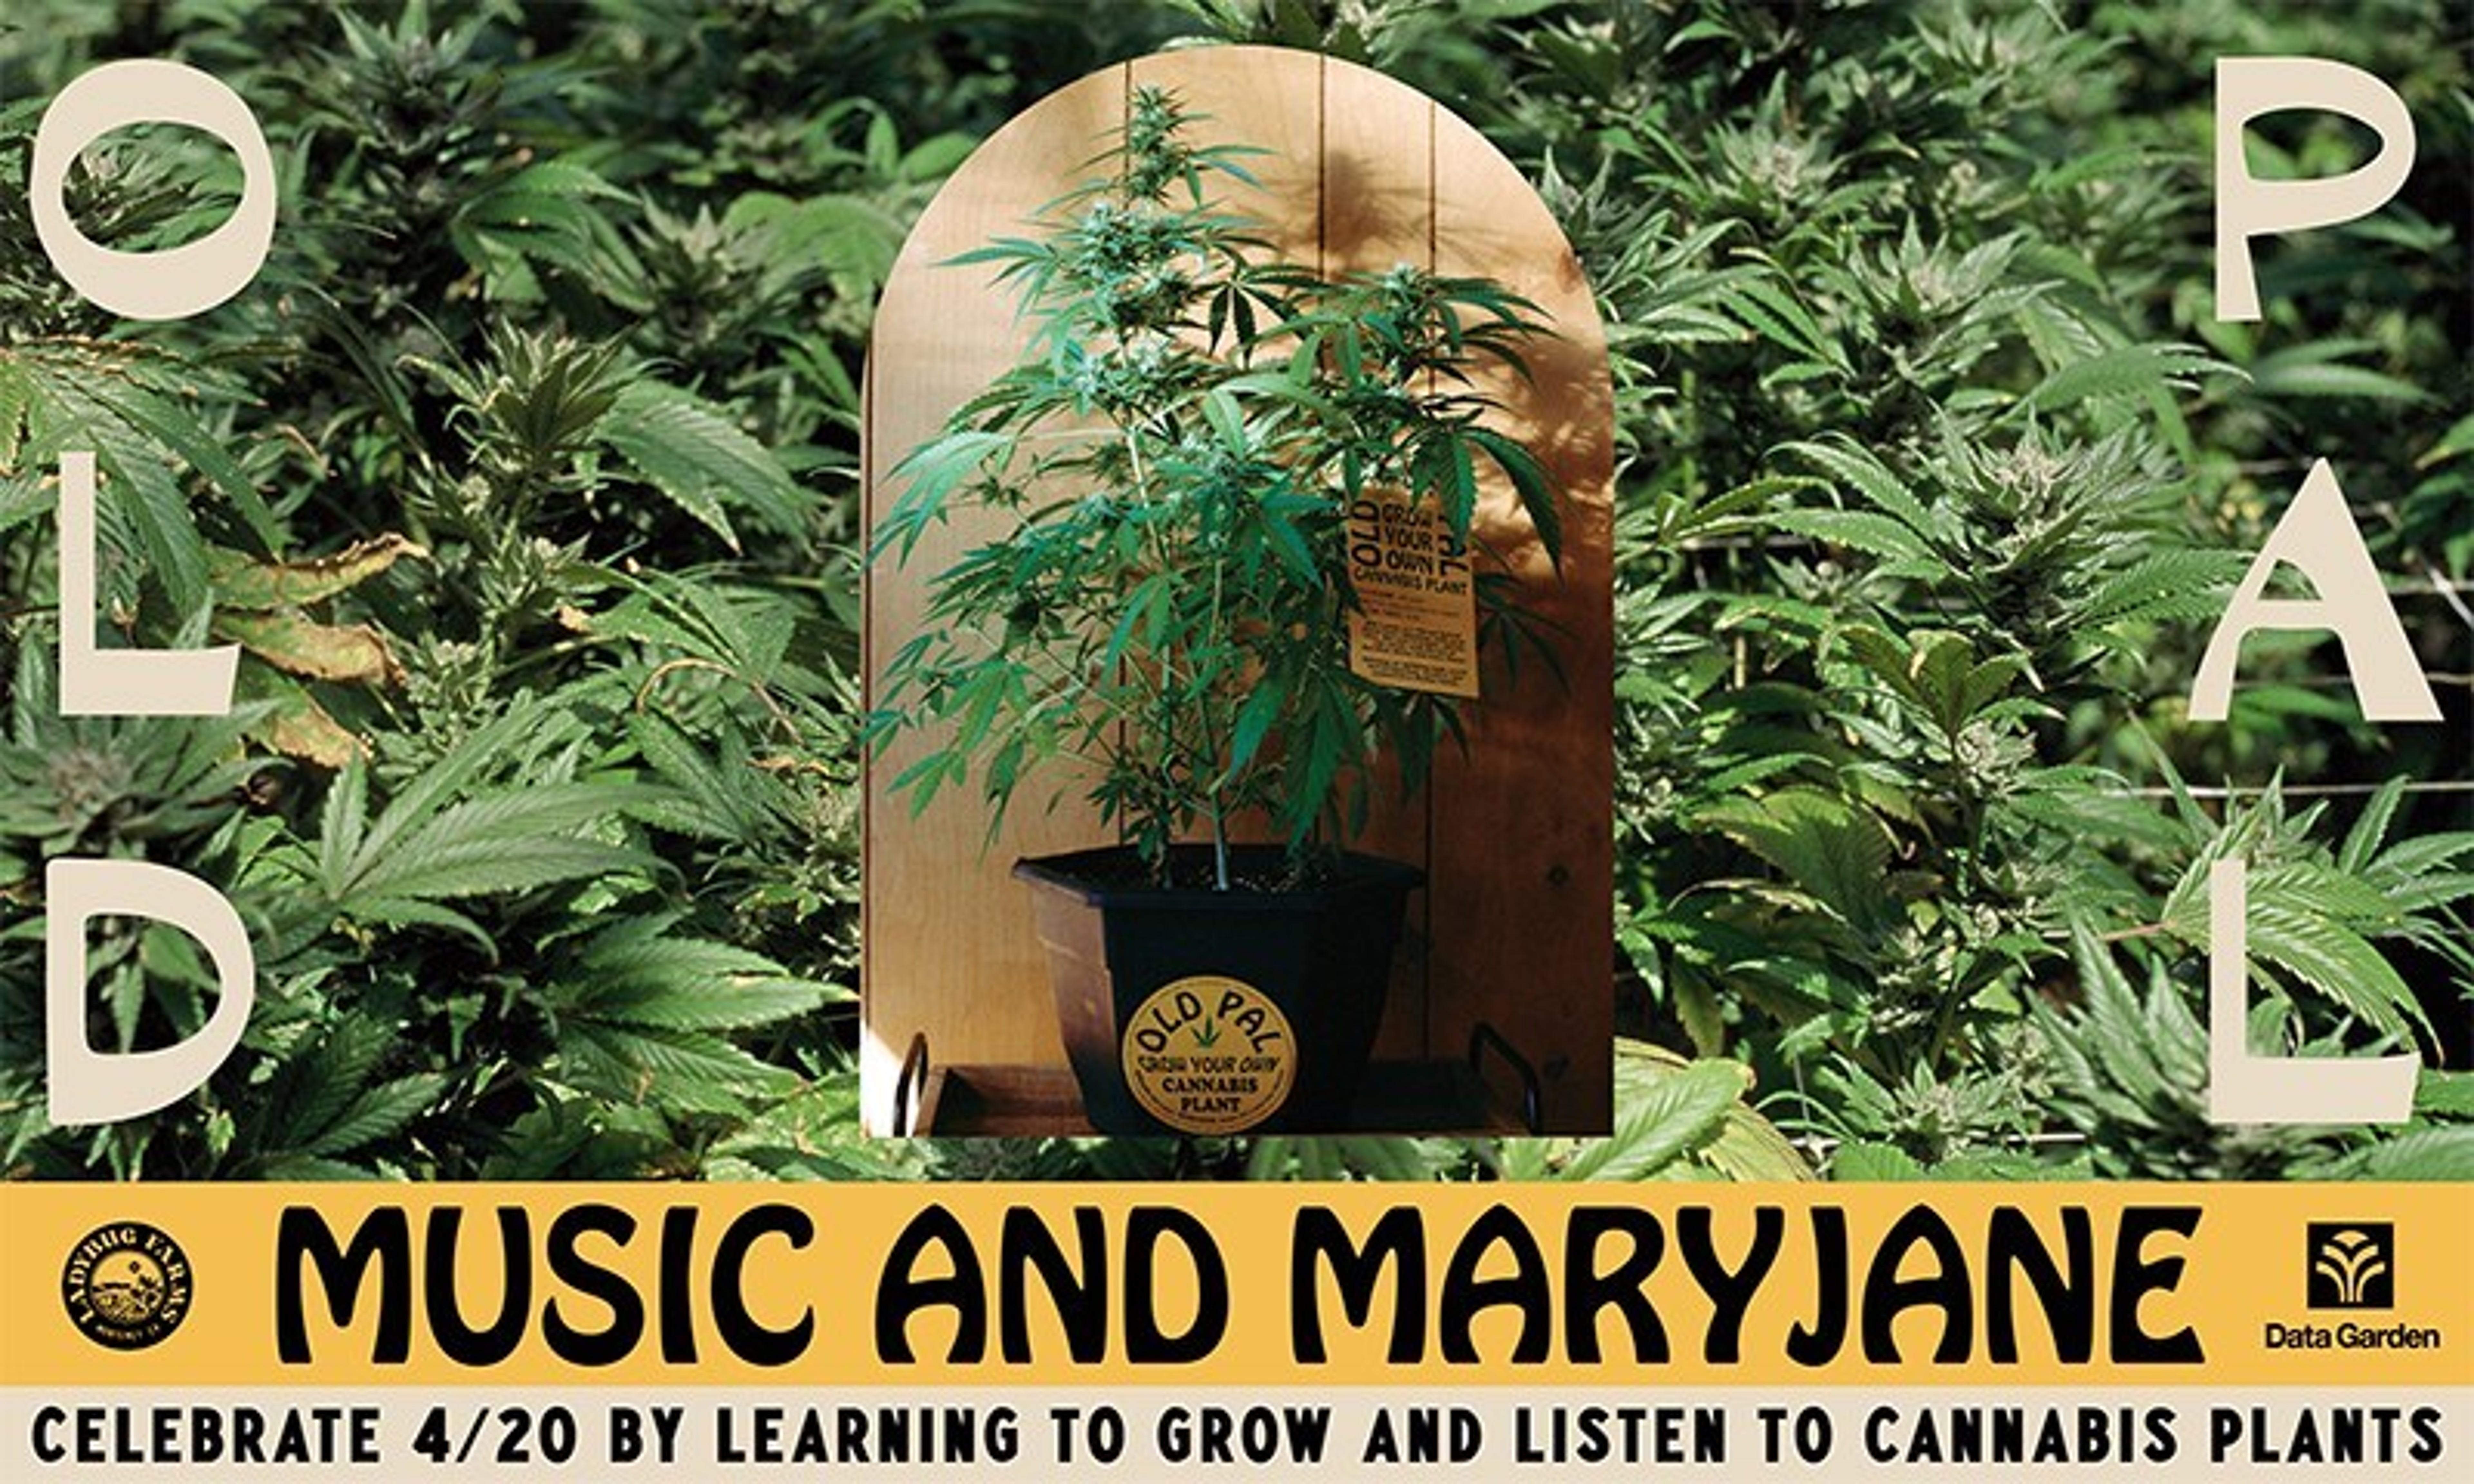 Old Pal &#39;Grow Your Own&#39; Initiative Set For 4/20, Partners With PlantWave To Make Music From Living Cannabis Plants